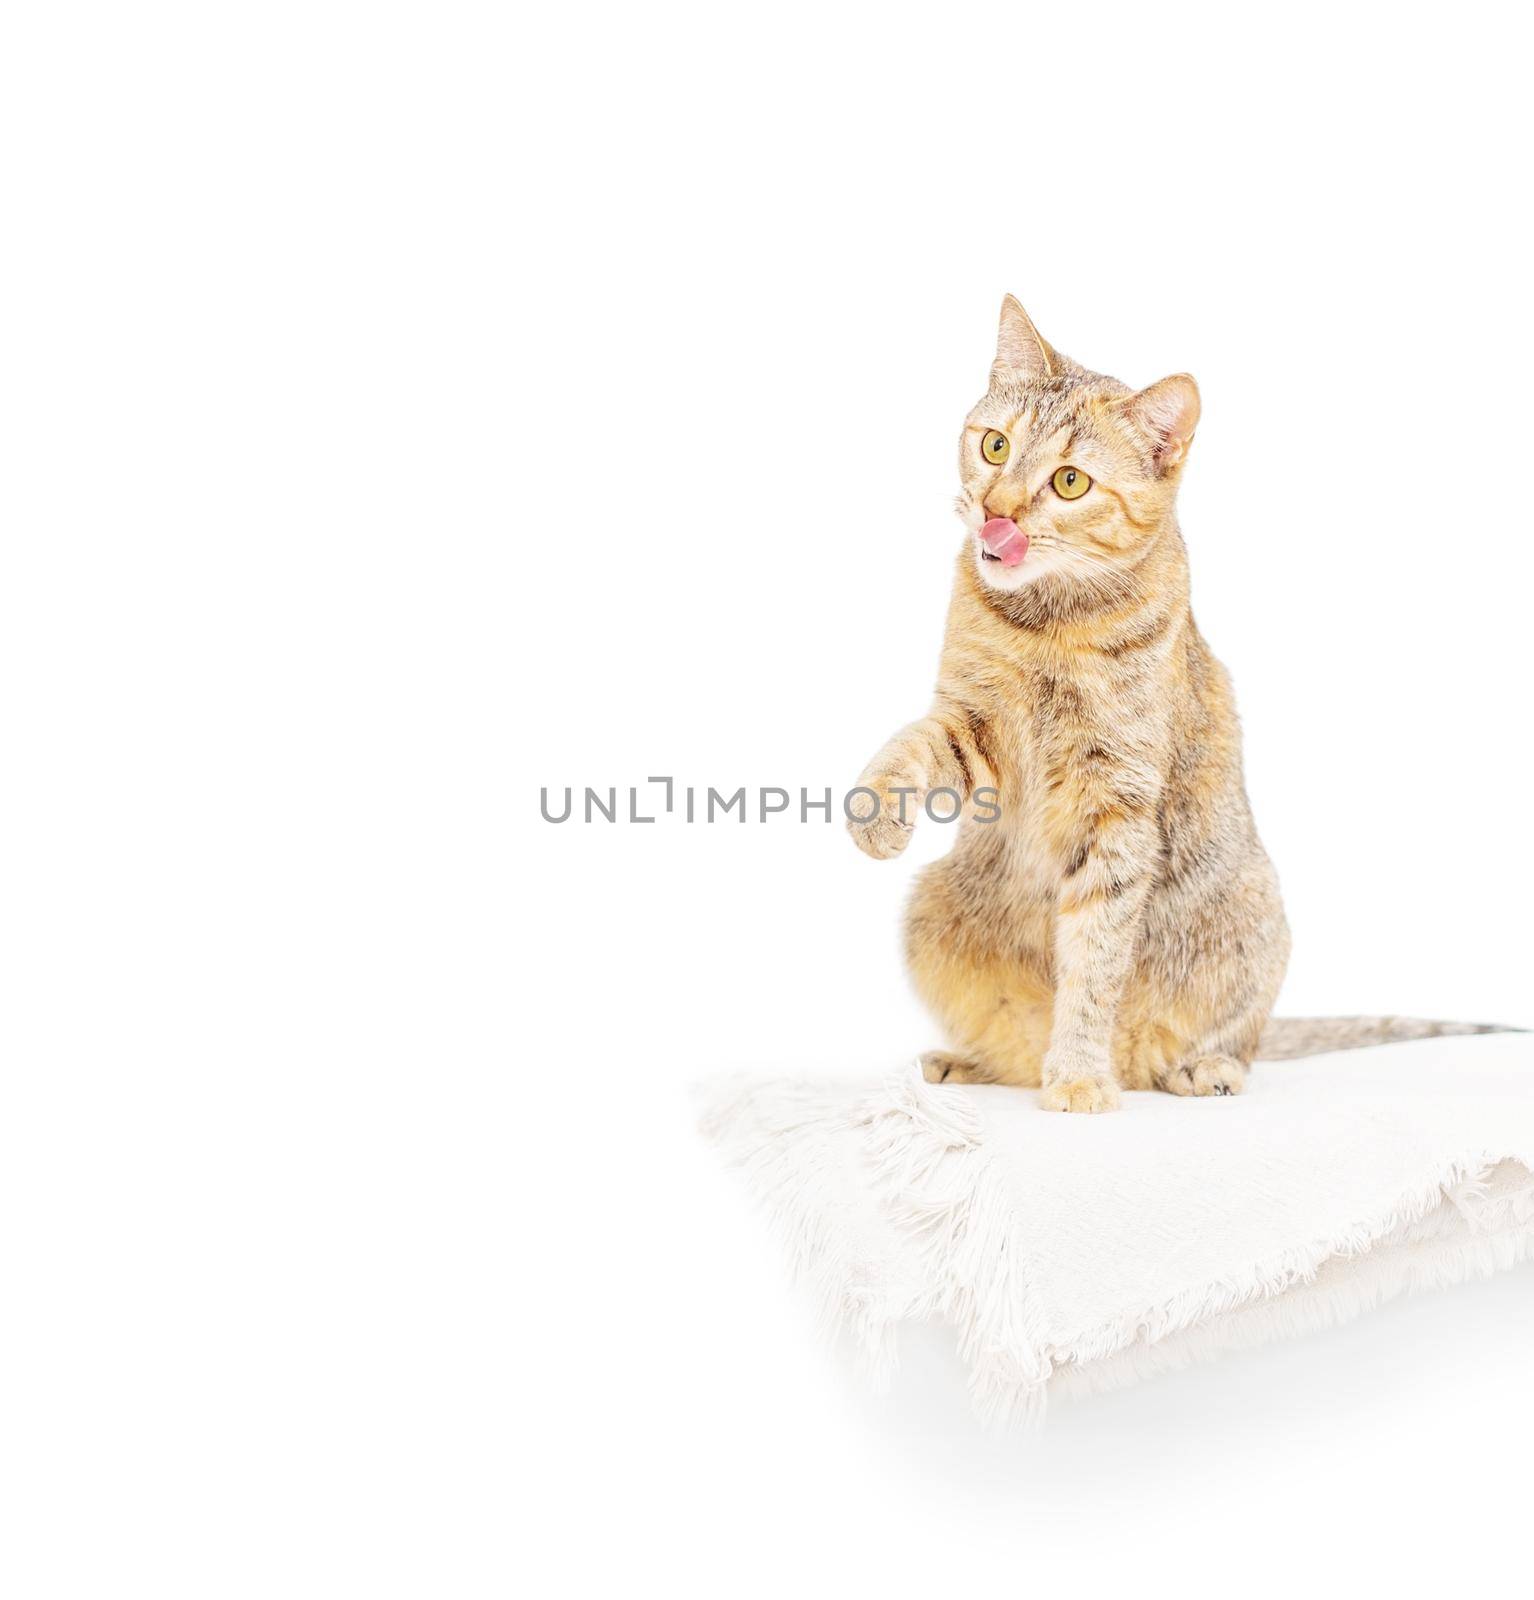 Cute cat of ginger color sitting on white background and licking. Copy-space in left part of image.